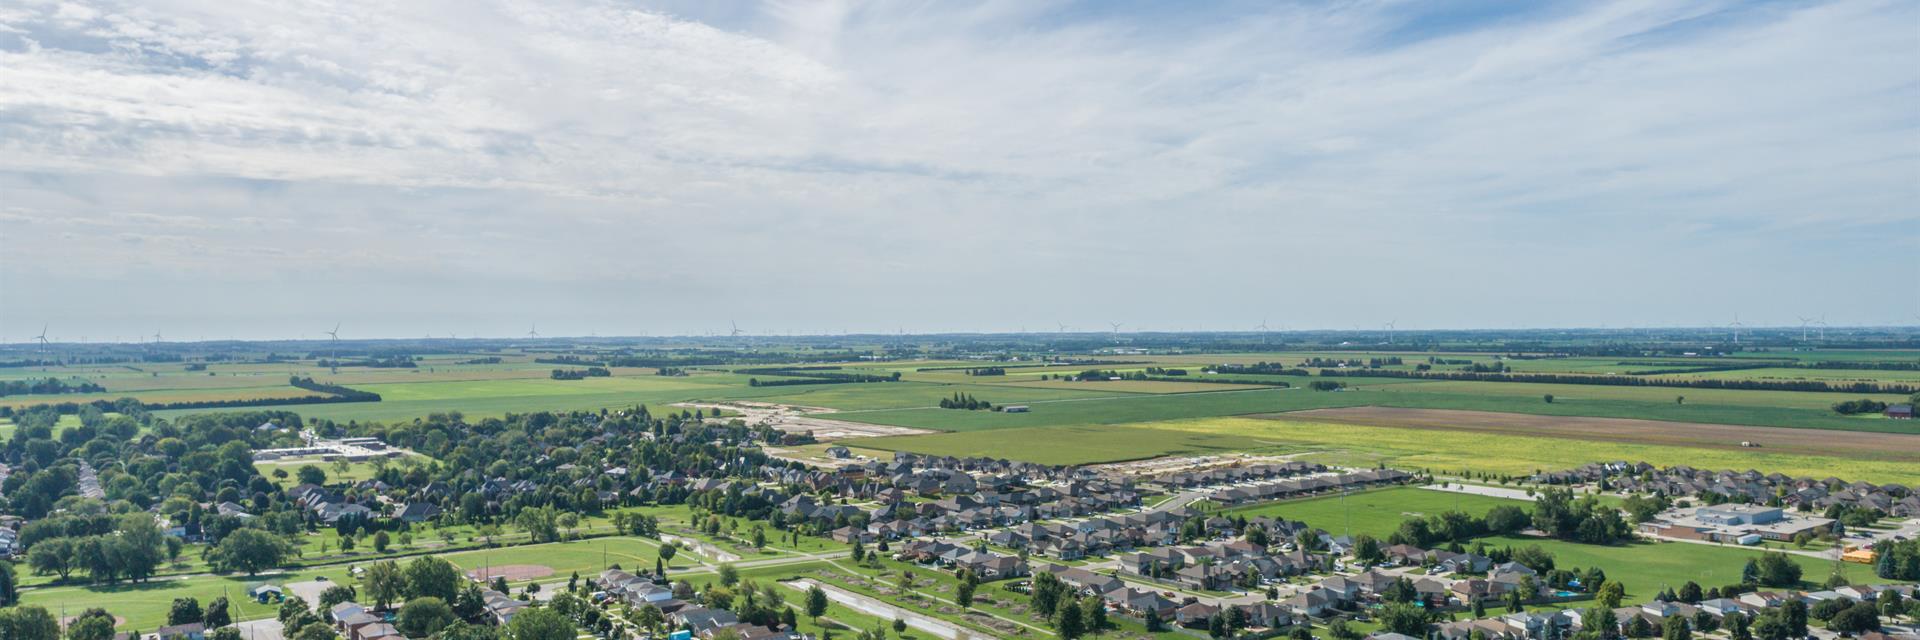 Drone shot of Chatham-Kent of green neighbourhoods and fields and a blue sky above.